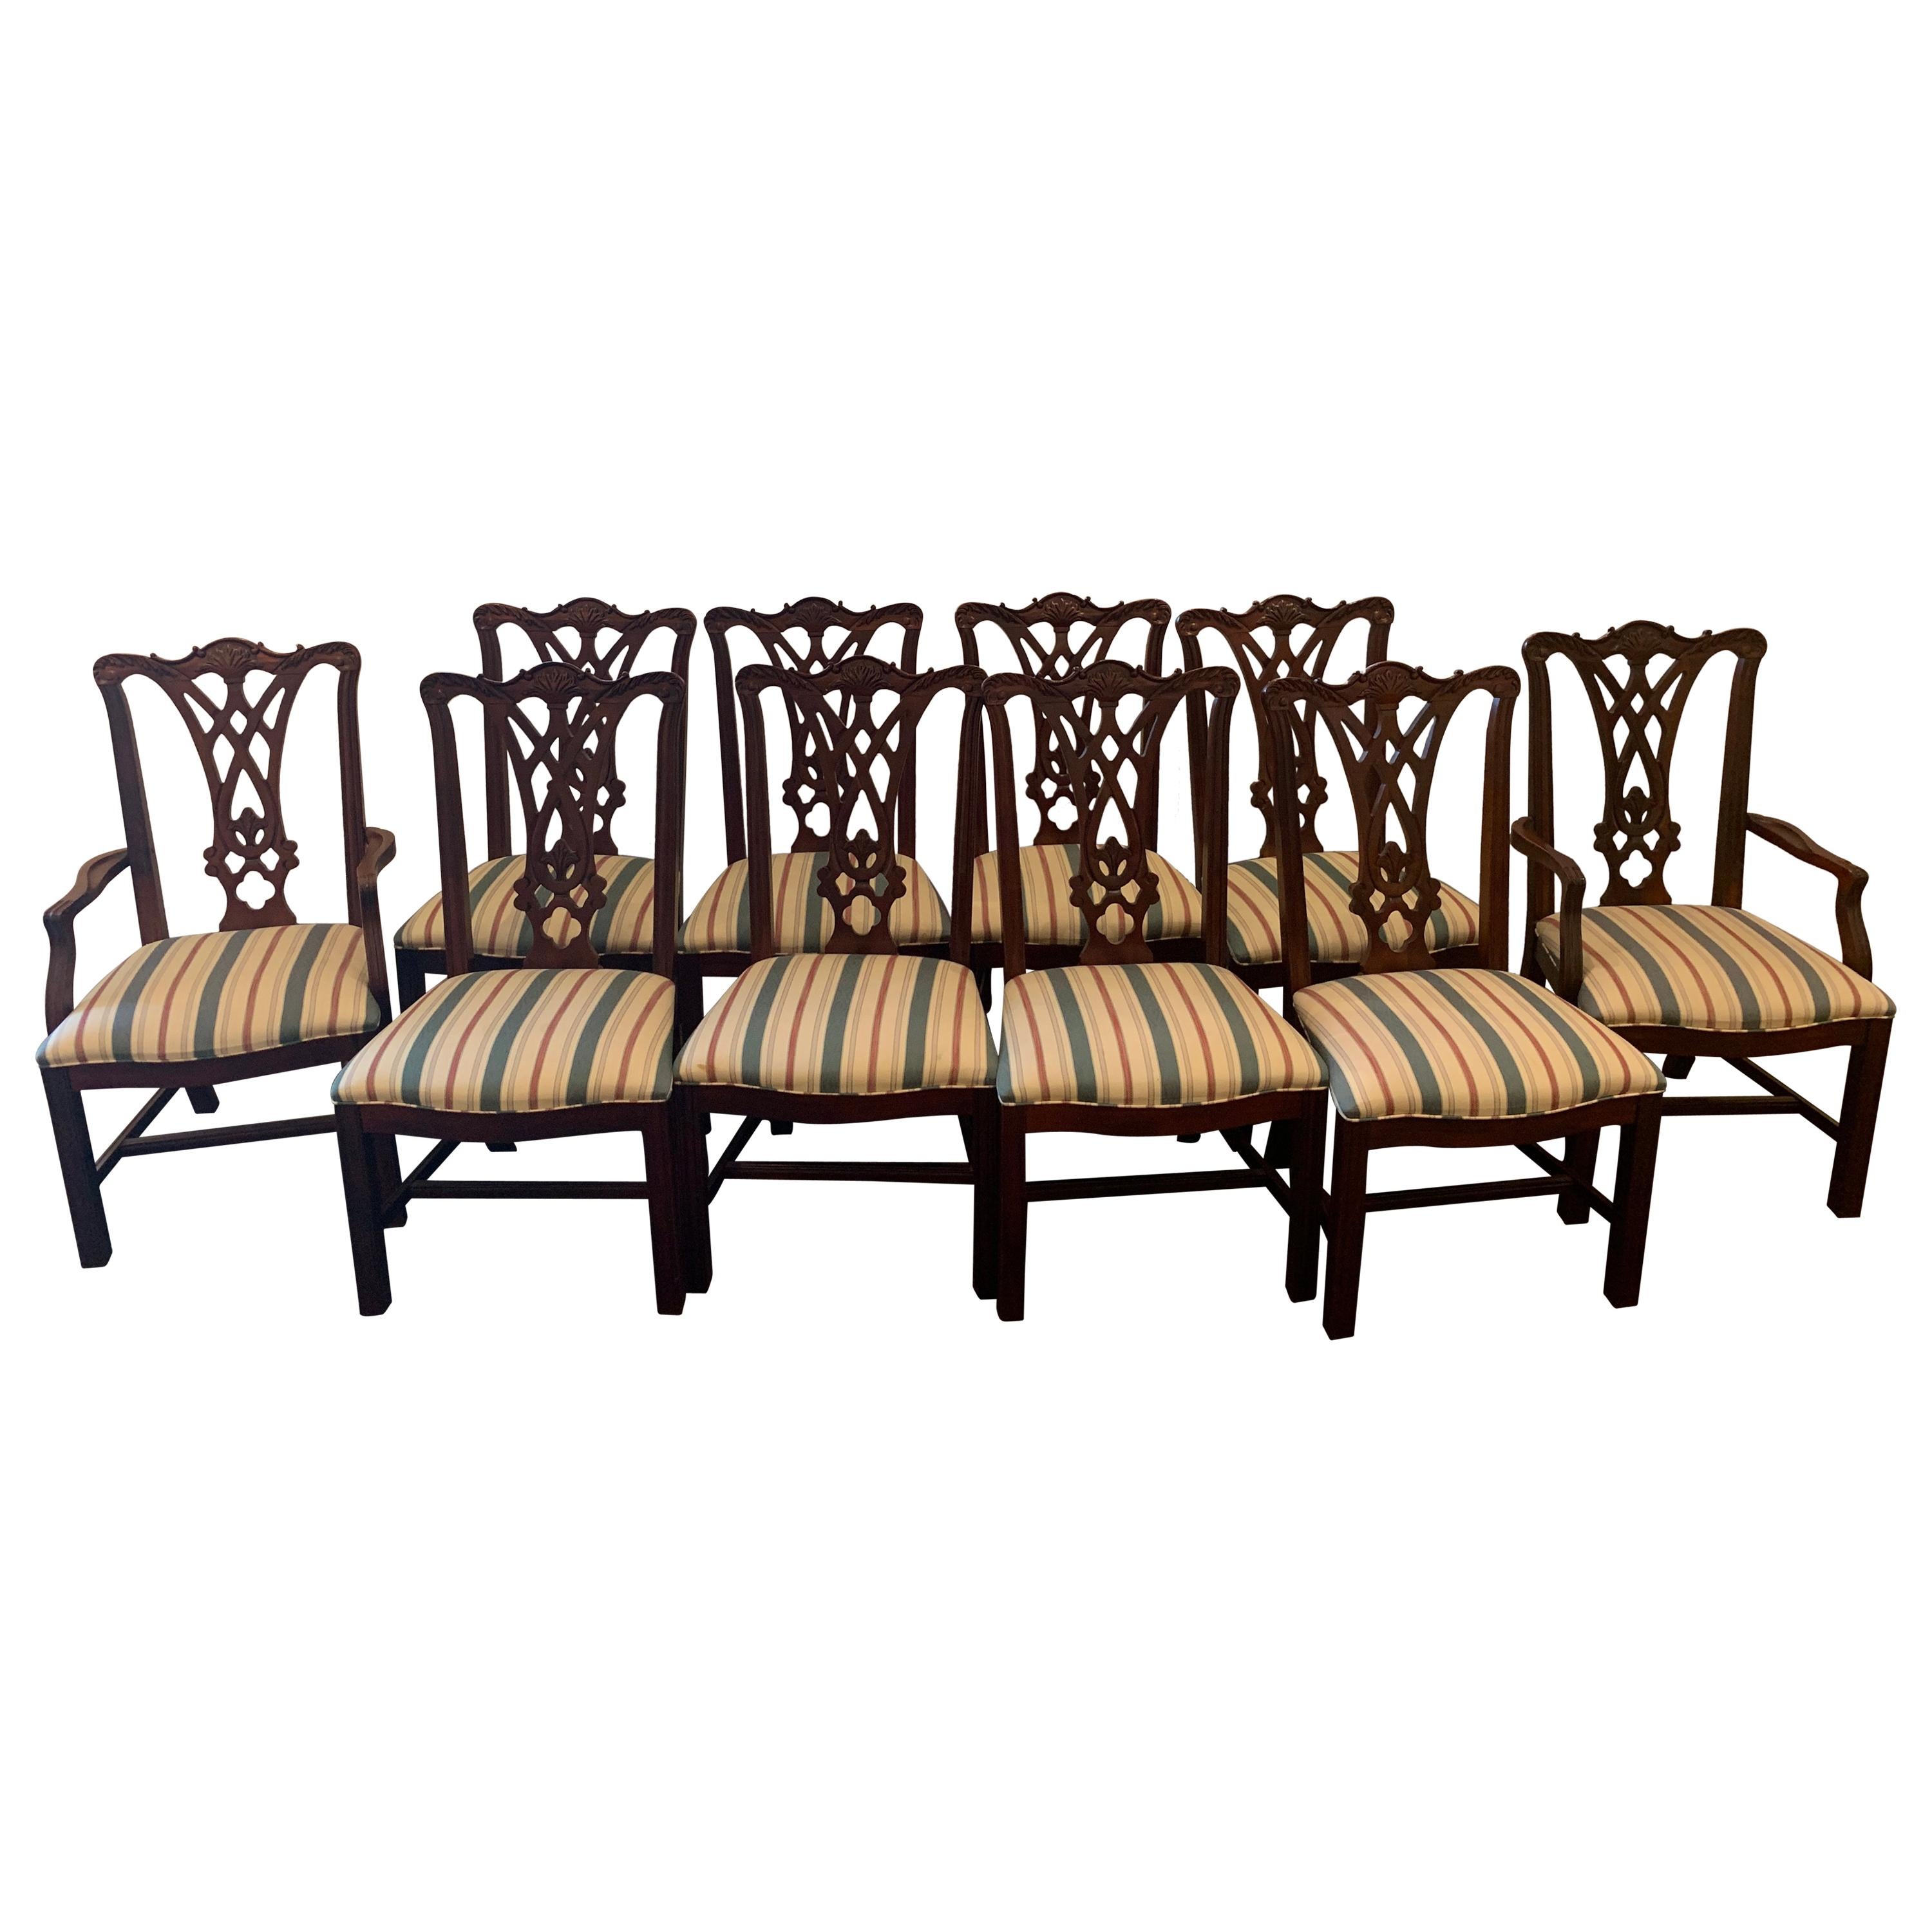 Ten Georgian Style Mahogany Dining Room Chairs, by Thomasville For Sale